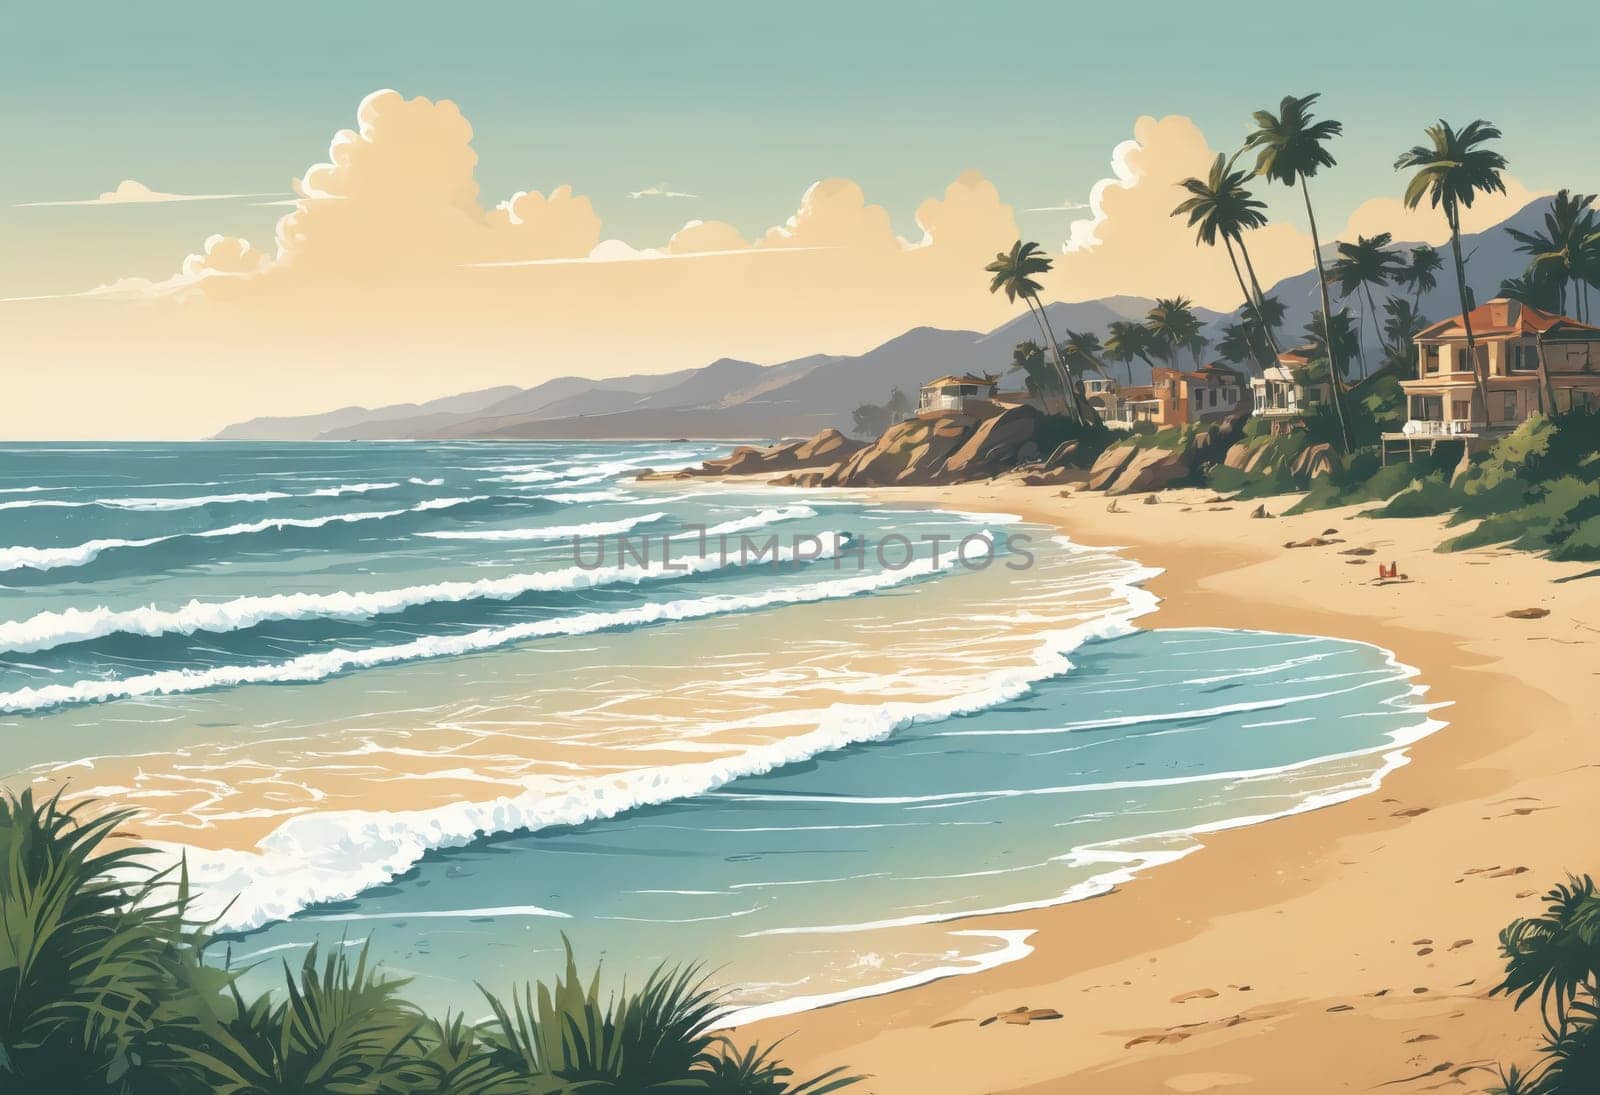 A serene beach scene, complete with palm trees and relaxed beachgoers under a calm sky, embraced by gentle hills.